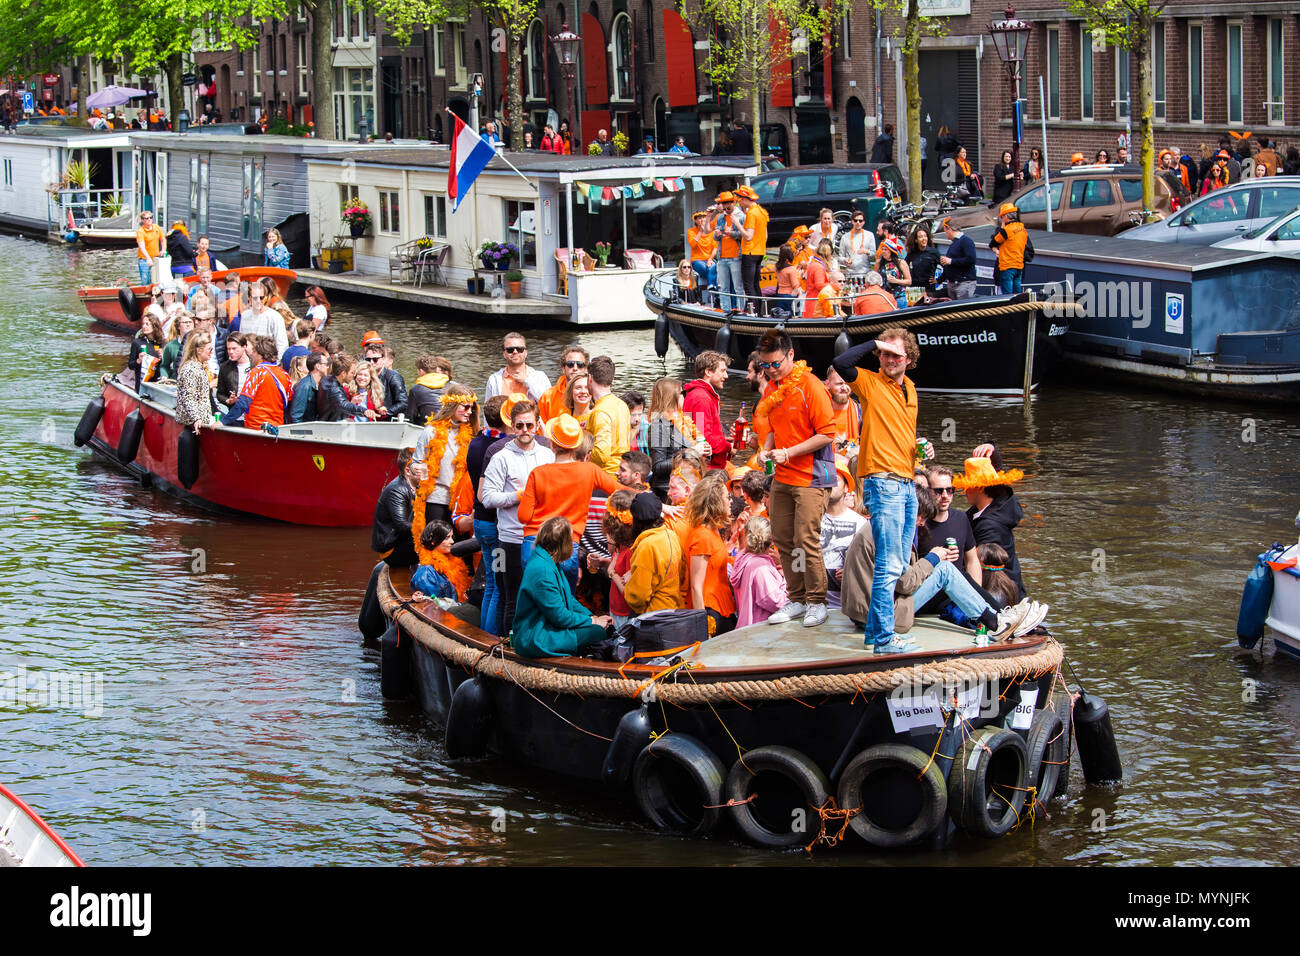 People on the boat celebrate King's day in Amsterdam city, Netherlands Stock Photo